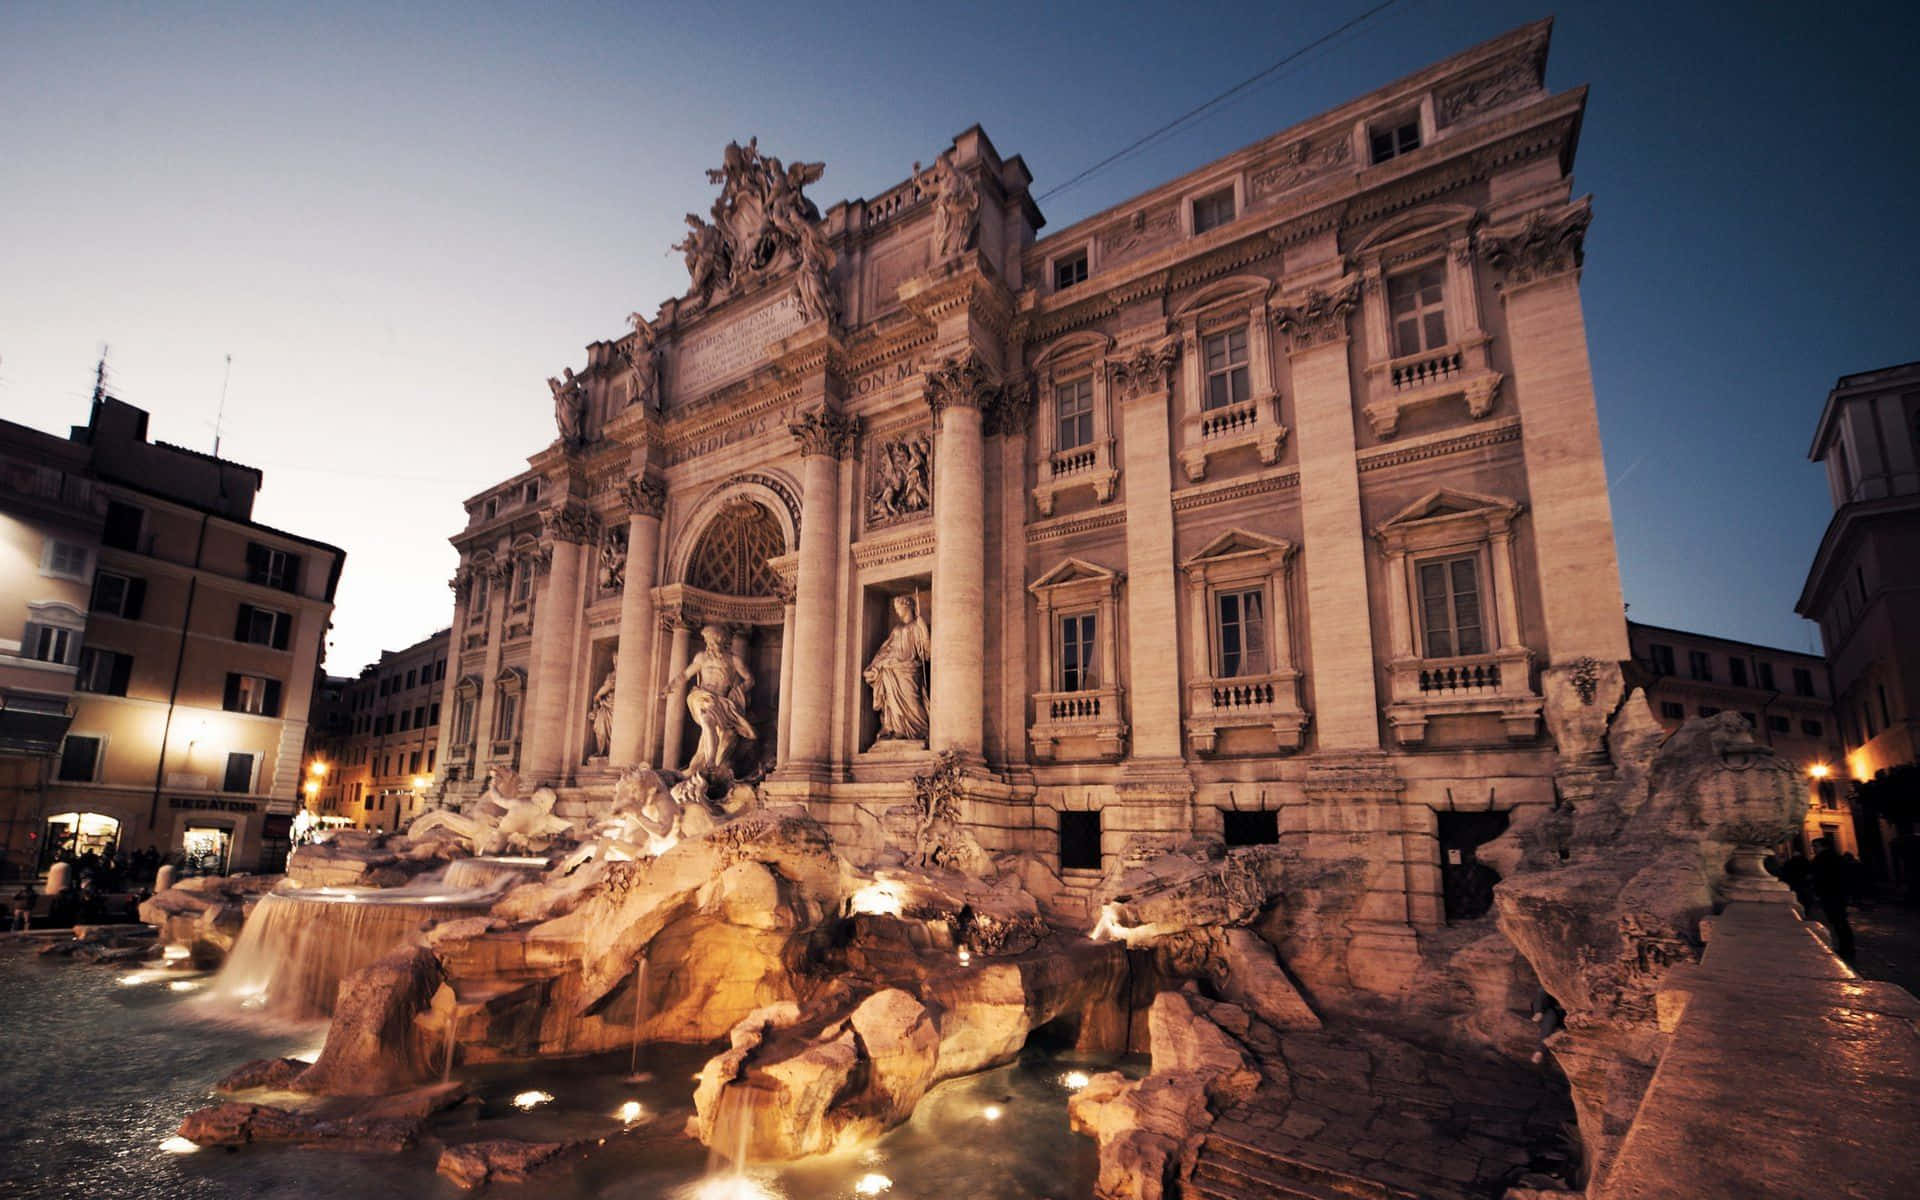 No matter how many times you visit, you'll always be enchanted by Rome, the Eternal City